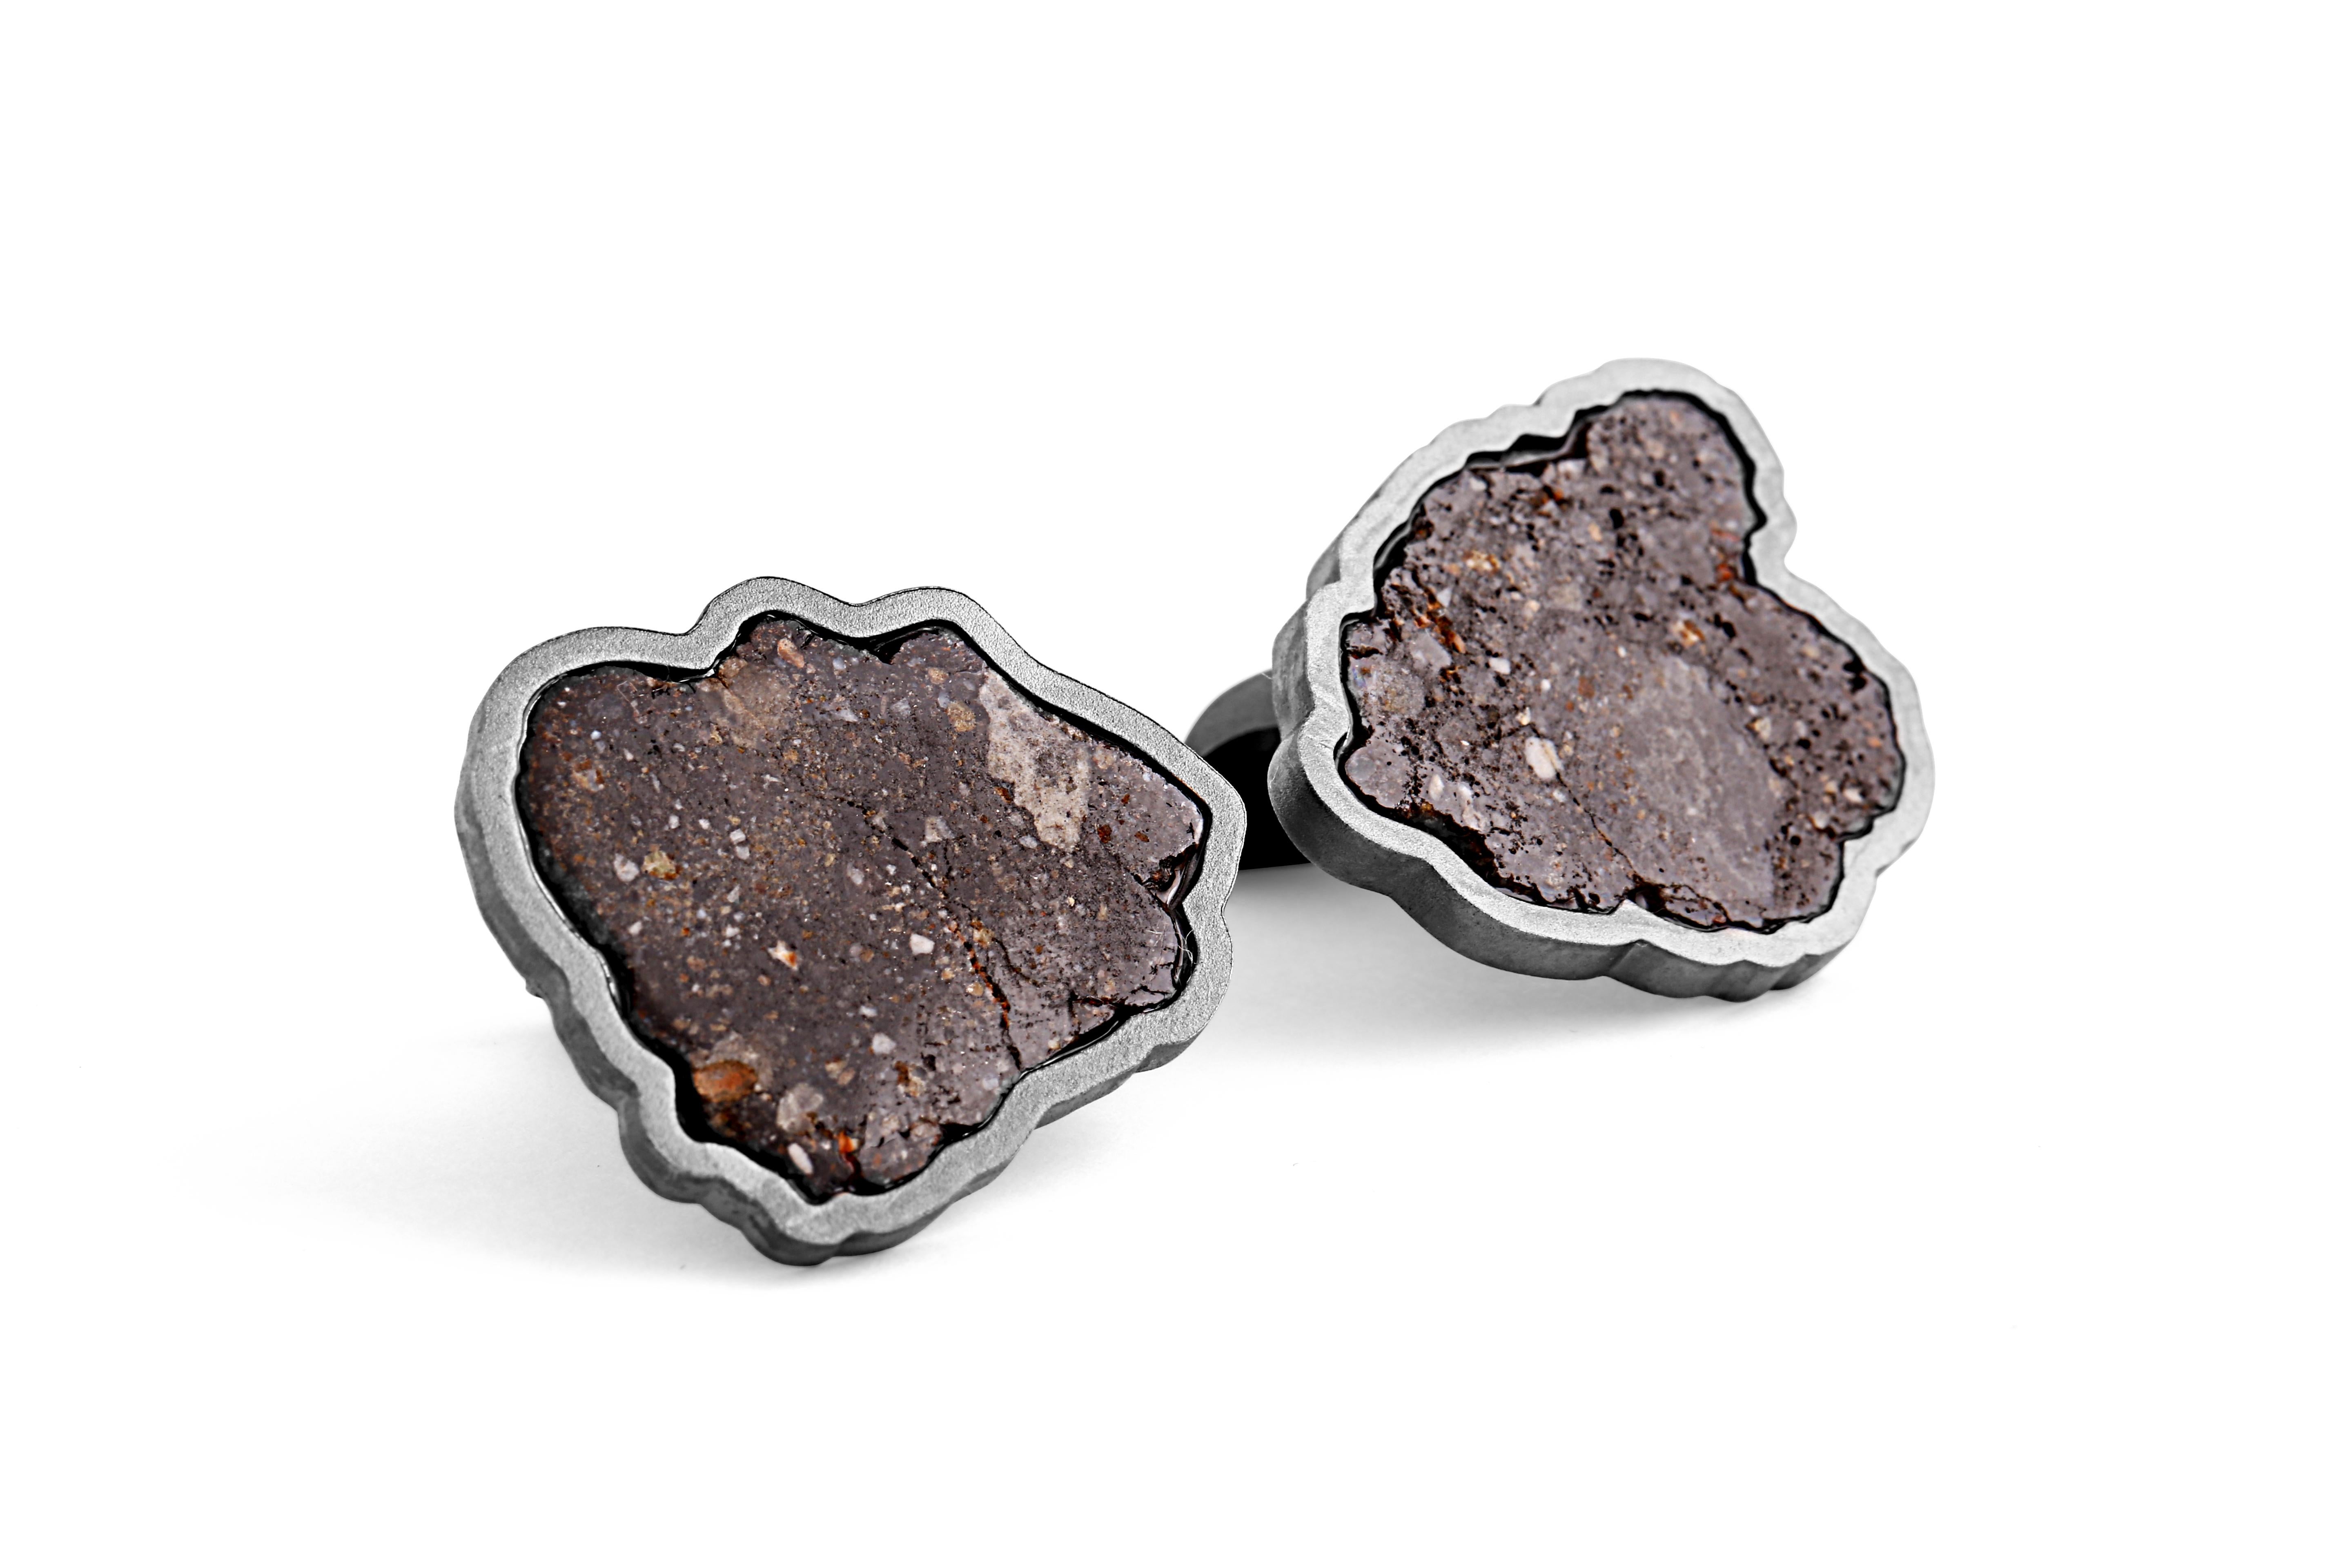 In 1961, Kennedy gave his Moon Speech to Congress, charging them with putting an American on the moon. Today in 2019, Tateossian has charged itself with bringing the Moon to you. Lunar Achondrite is a stony meteorite and has distinct textures and